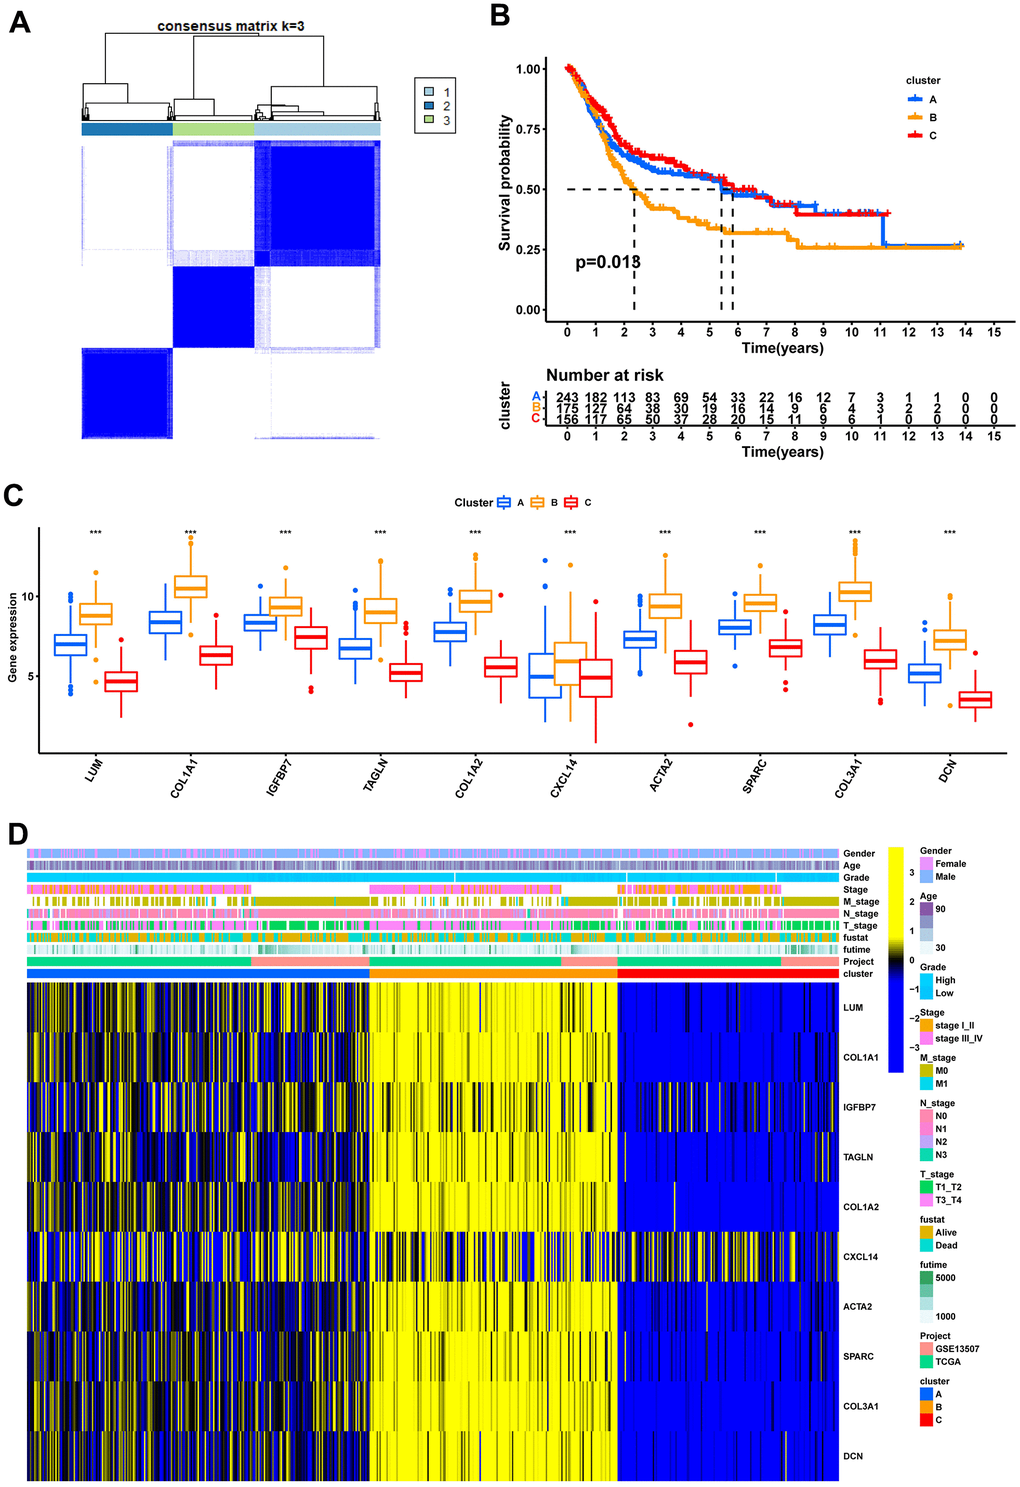 Recognition of 3 fibroblast marker gene subtypes by consensus clustering analysis. (A) Consensus matrix plots. K = 3 was determined as the optimal clustering number. (B) Kaplan-Meier survival analysis in clusters A, B, and C. (C) Differential expression of marker genes in fibroblast marker gene subtypes. (D) Heatmap of the marker gene expressions among clusters A, B, and C.